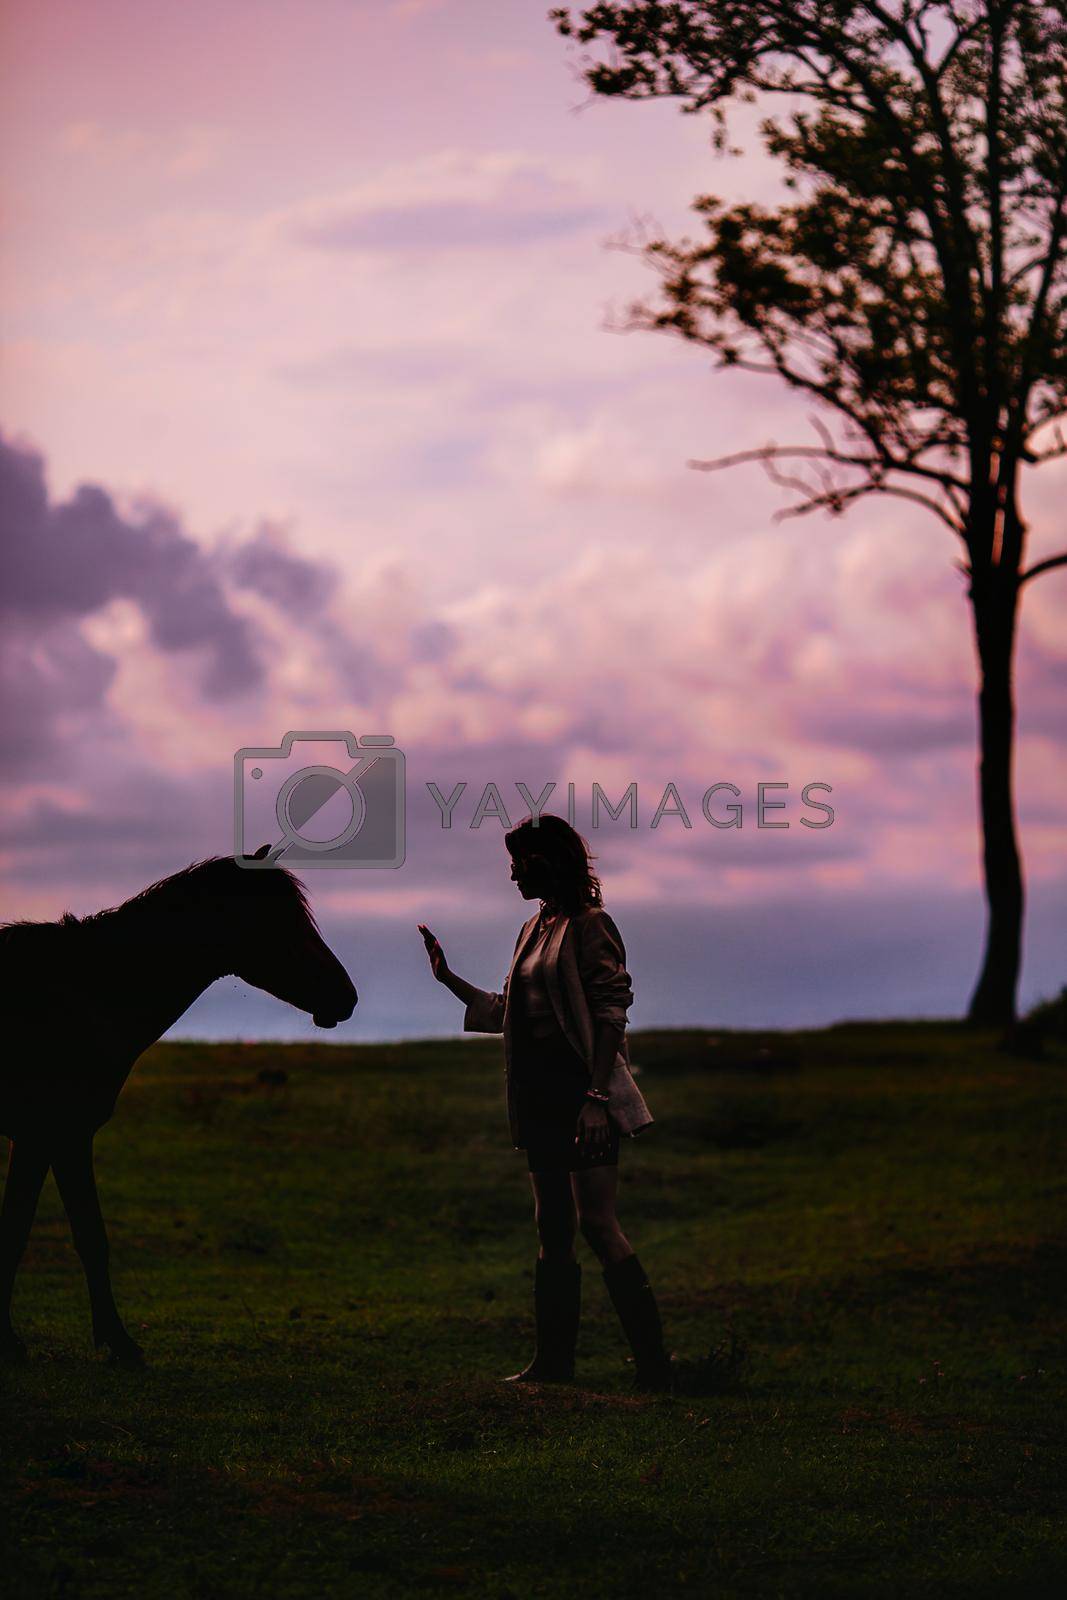 Royalty free image of Young woman with wild horse outdoors by travnikovstudio